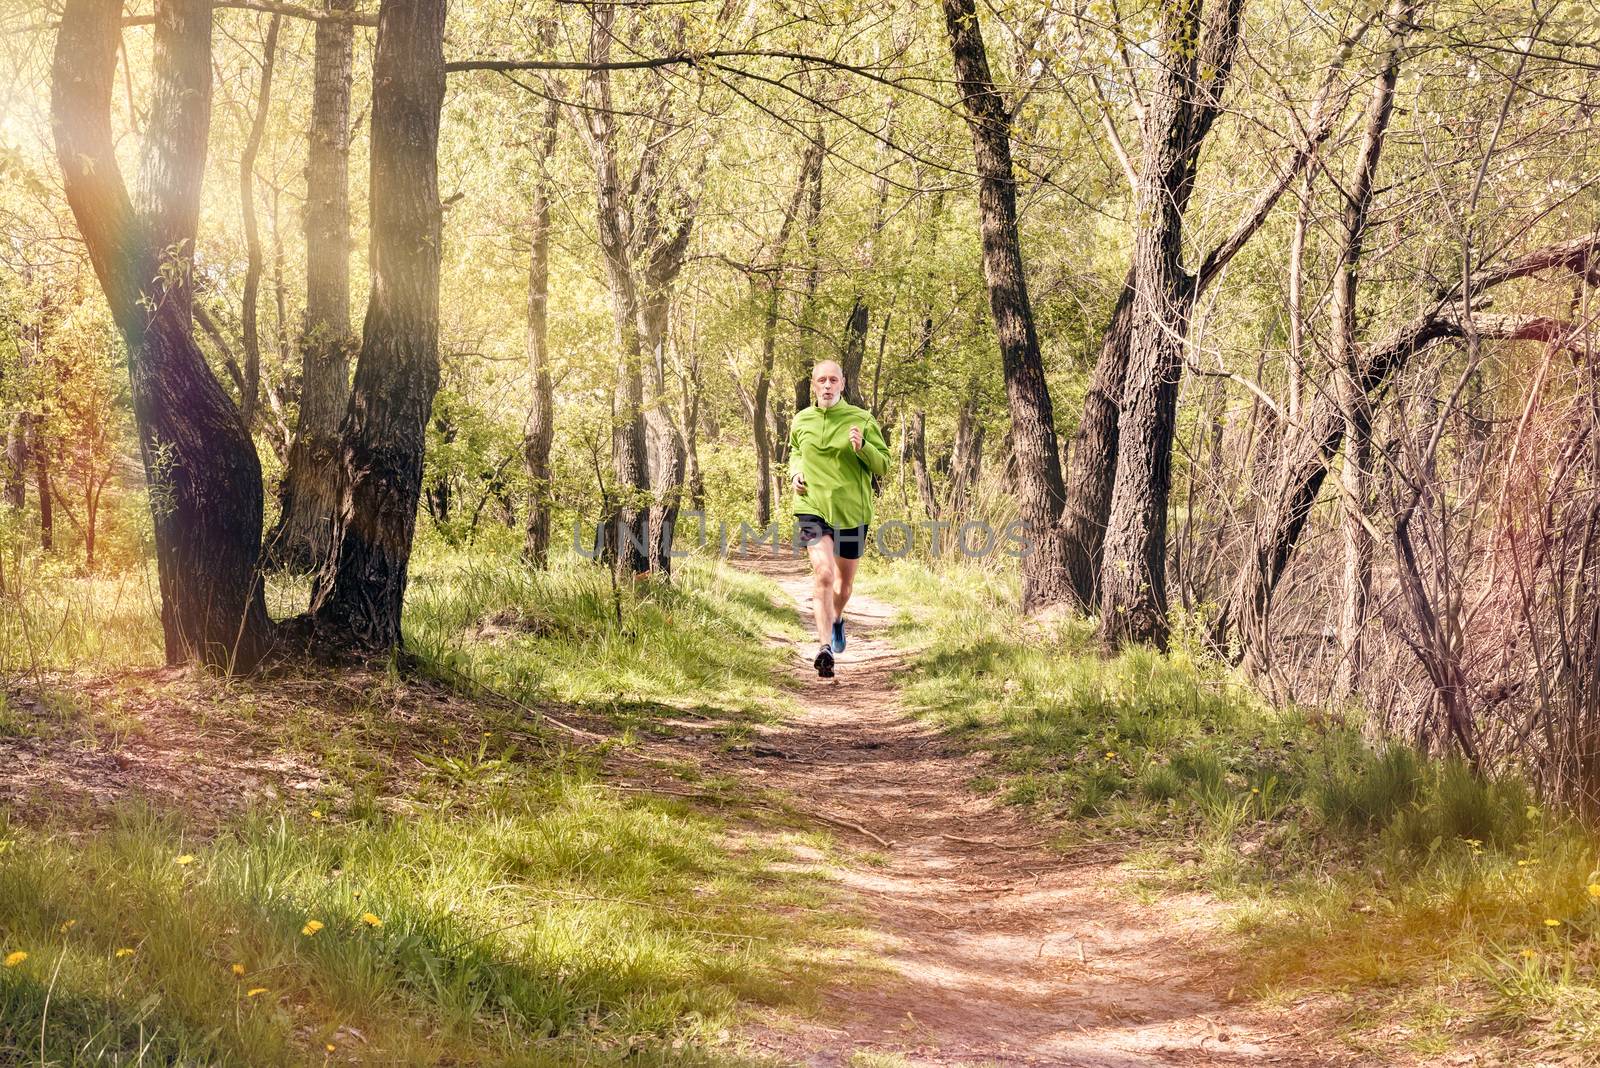 A senior man dressed in black and green is running in the forest, during a warm spring day